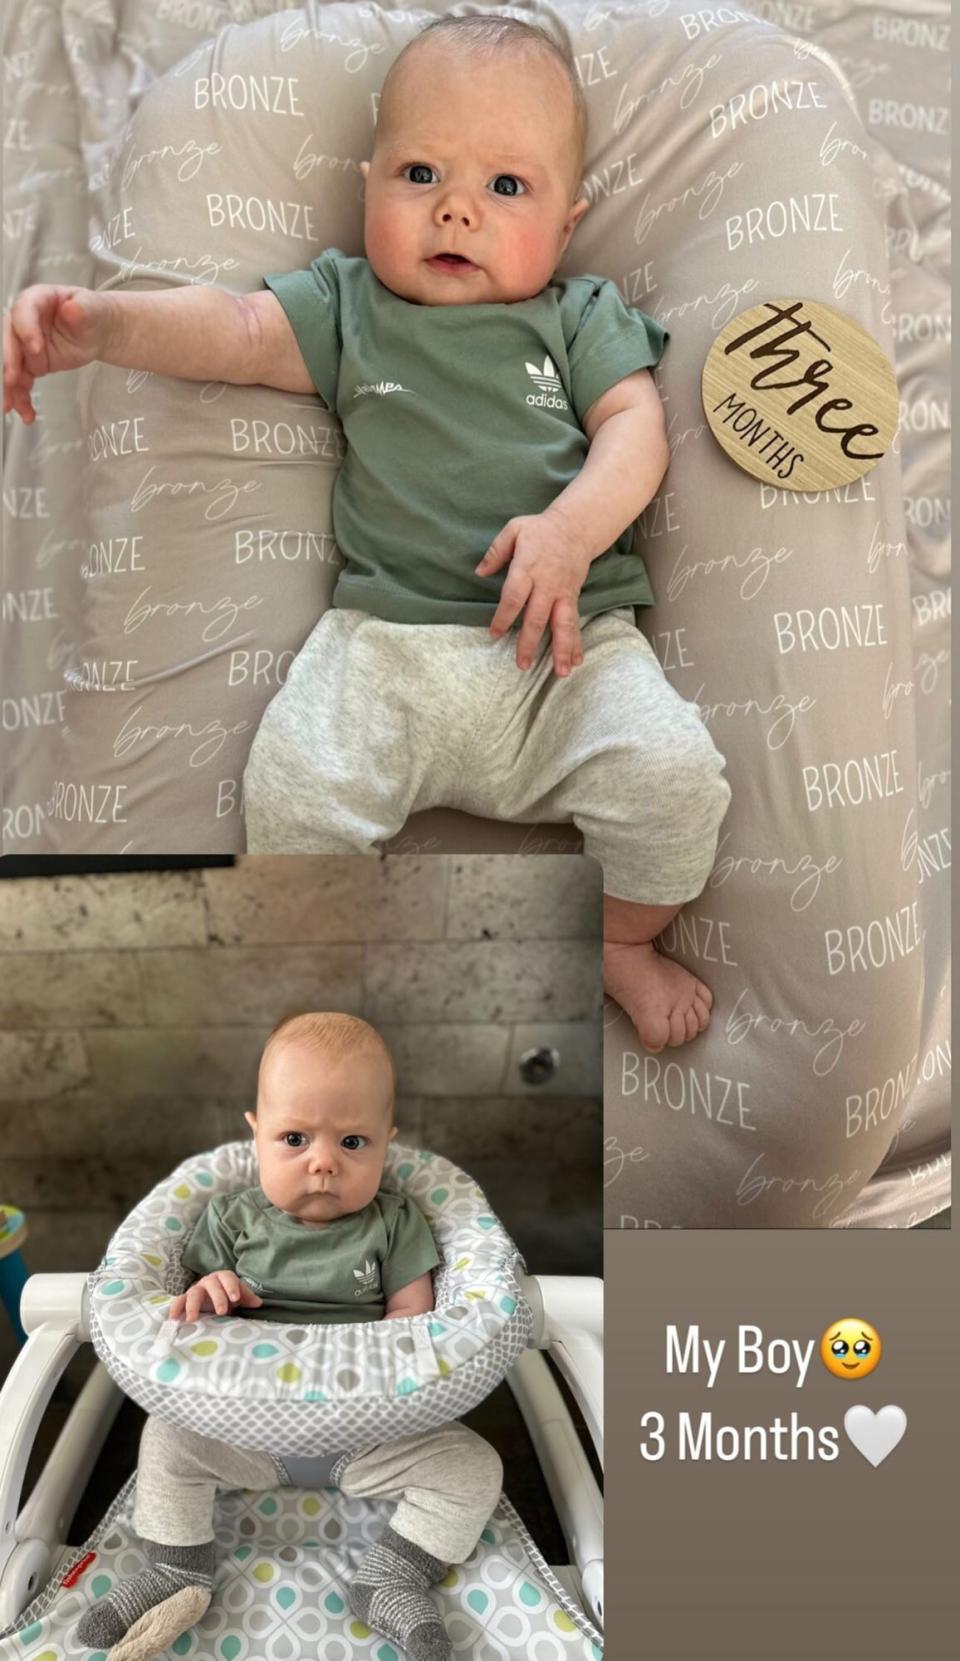 Brittany Mahomes posts photo of baby Bronze on his three month birthday